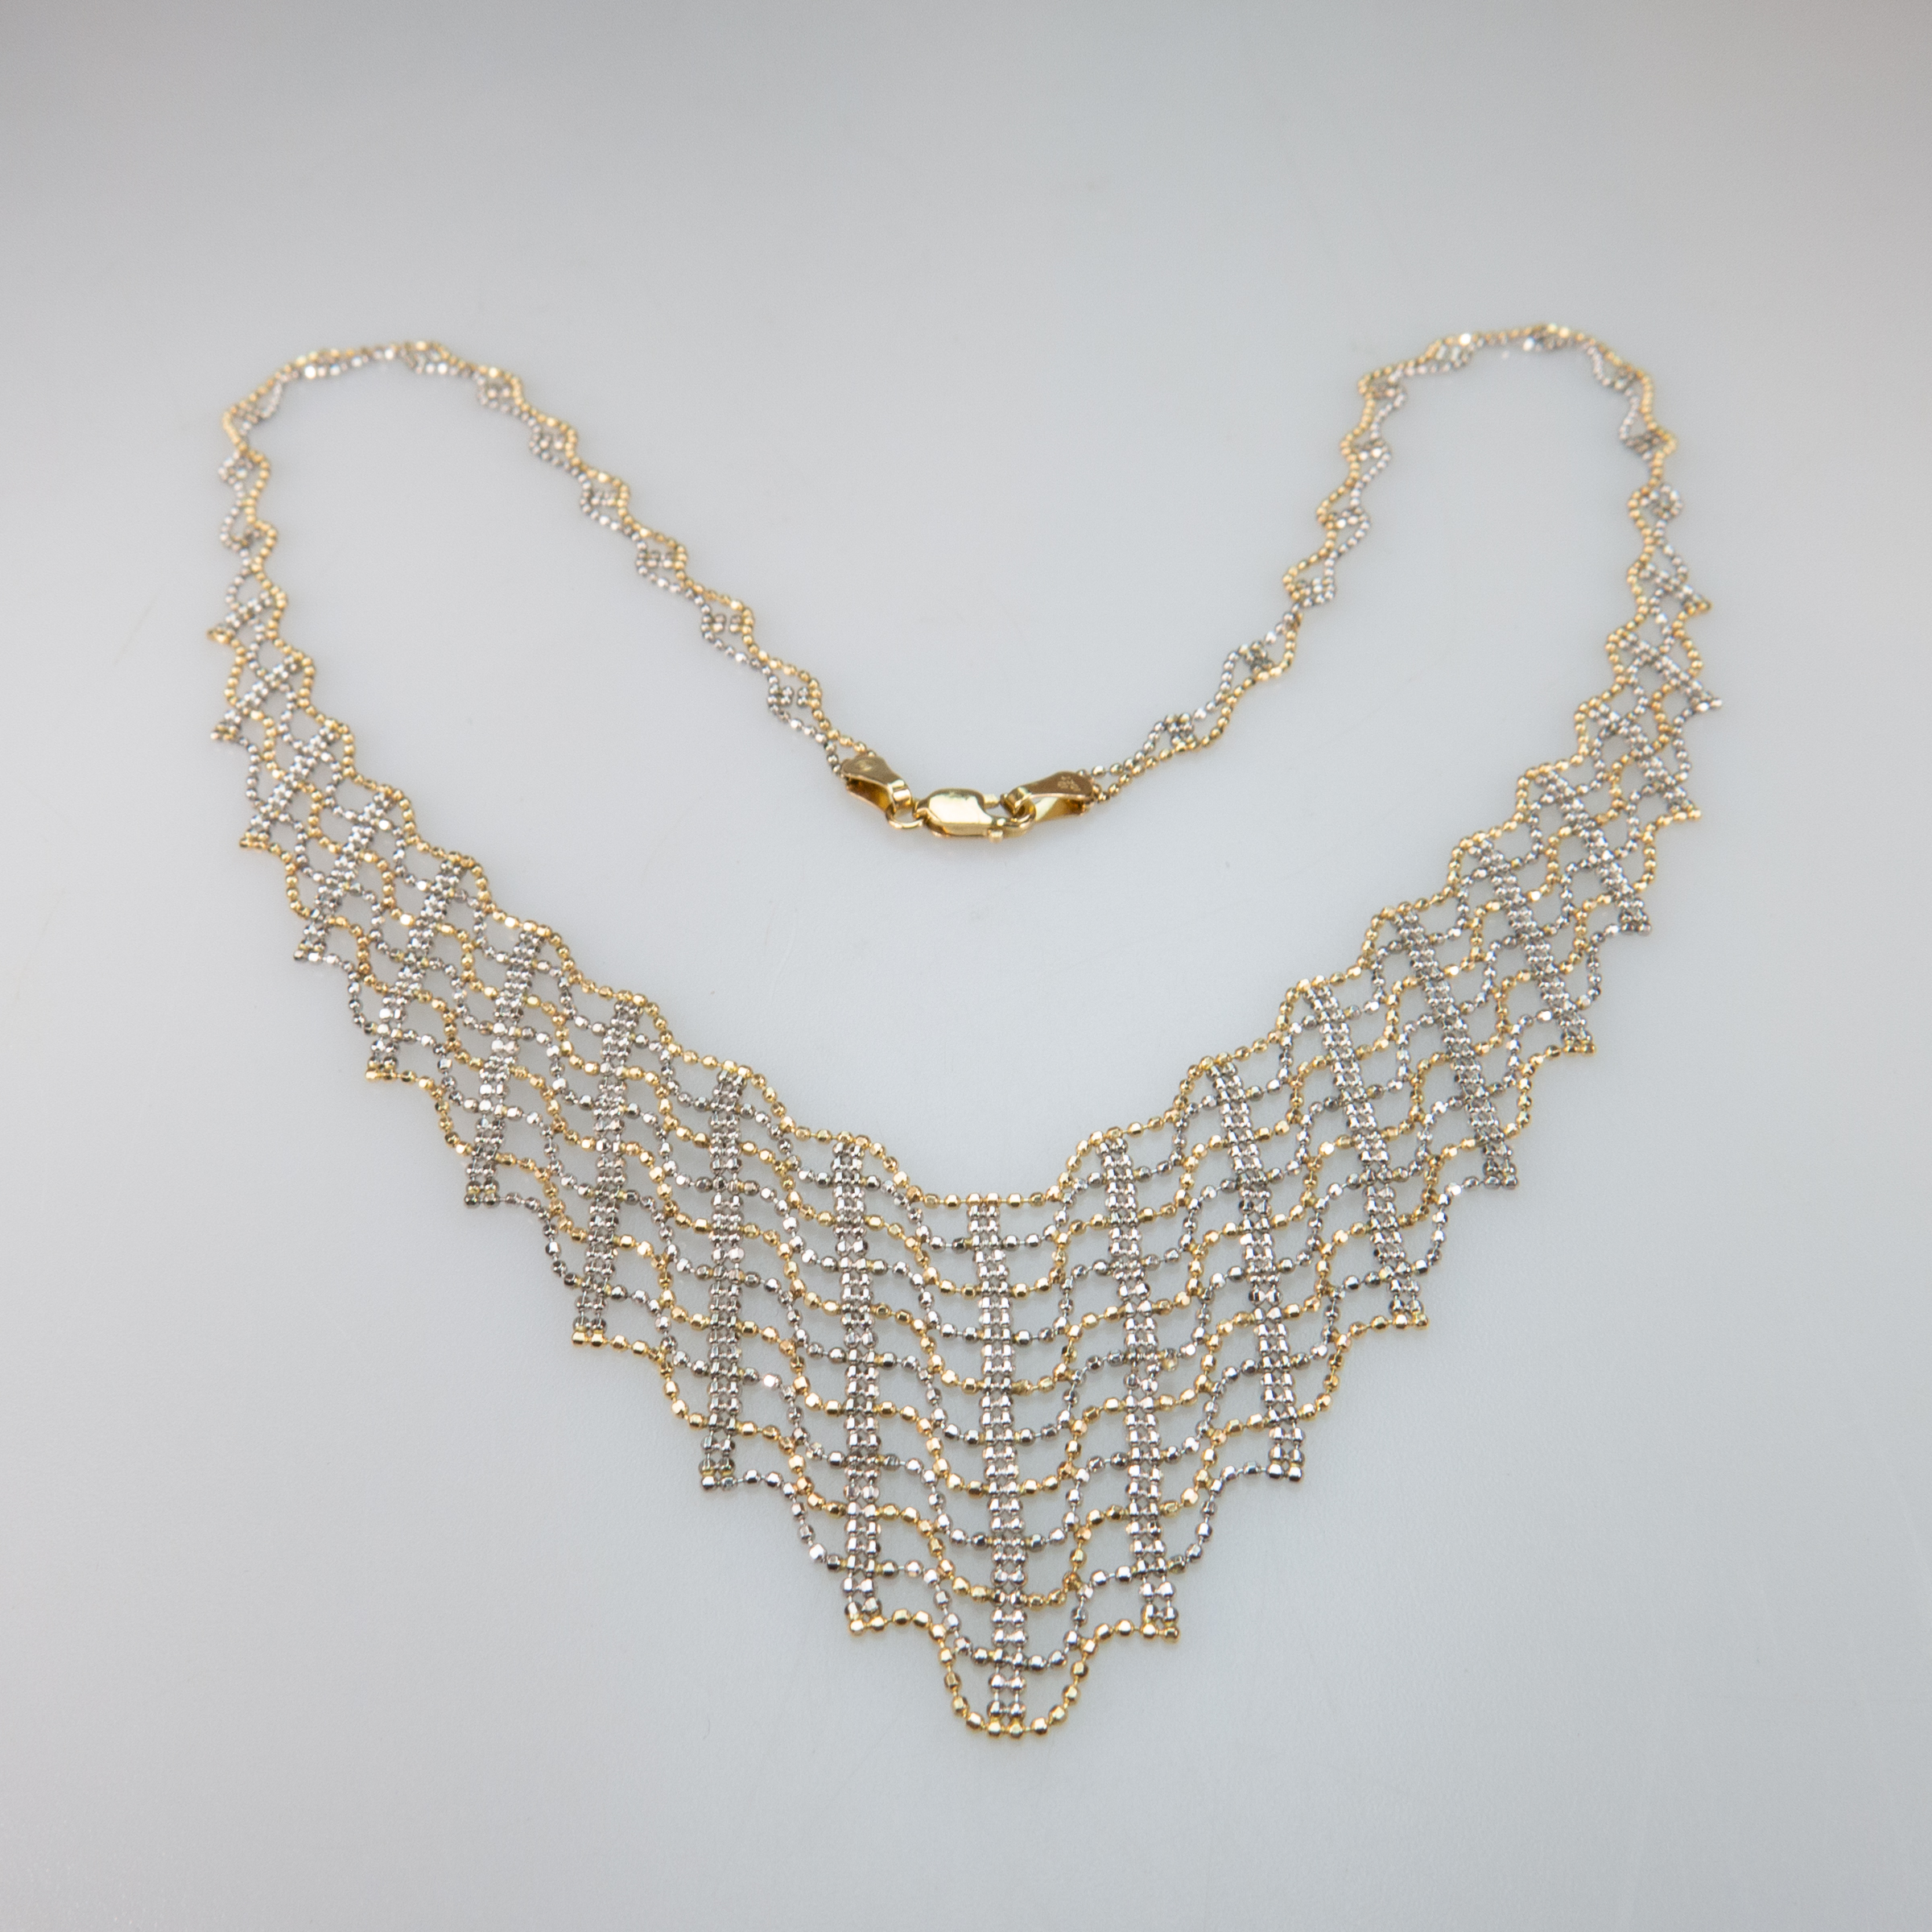 10k White And Yellow Gold Mesh Necklace